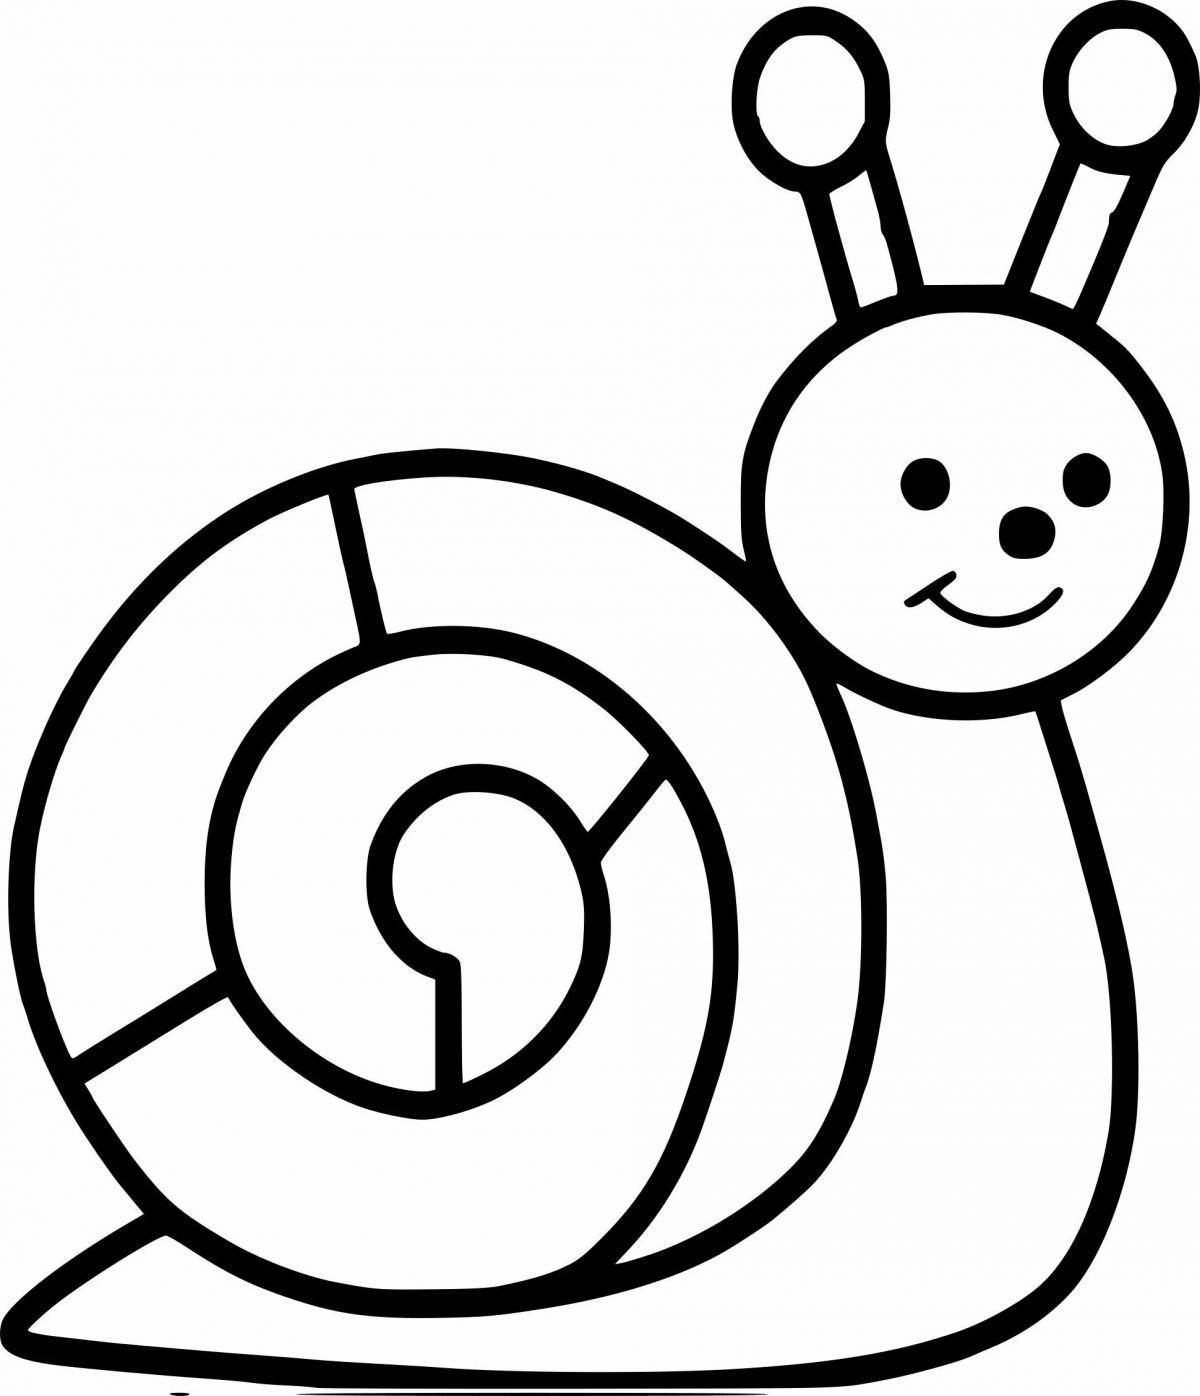 Playful snail drawing for kids